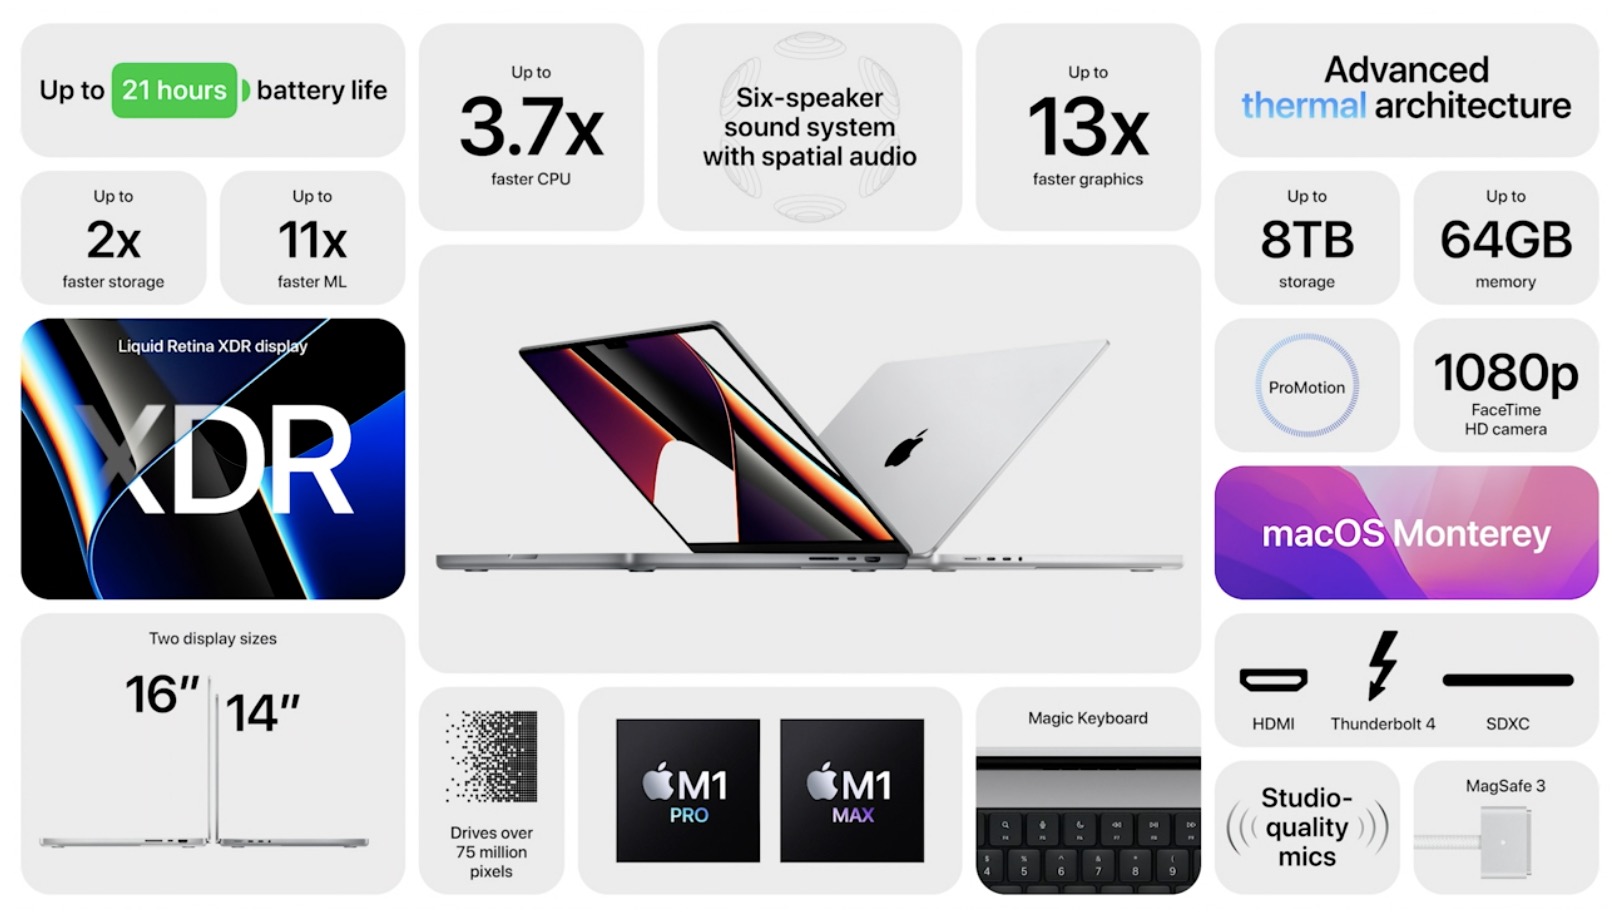 Apple's marketing image listing the key features of the 2021 MacBook Pro models